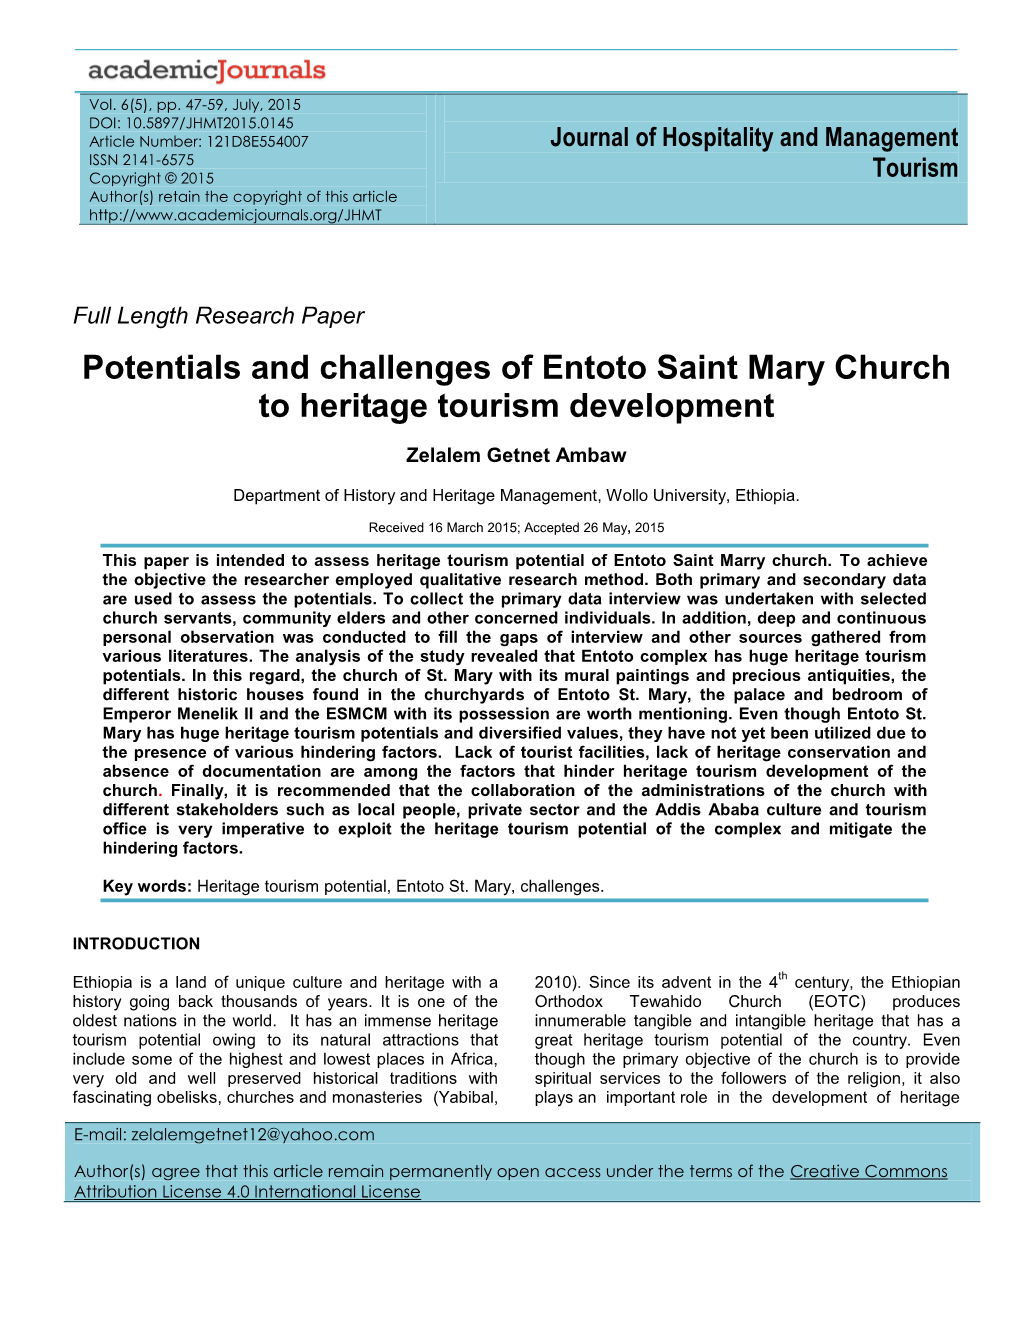 Potentials and Challenges of Entoto Saint Mary Church to Heritage Tourism Development